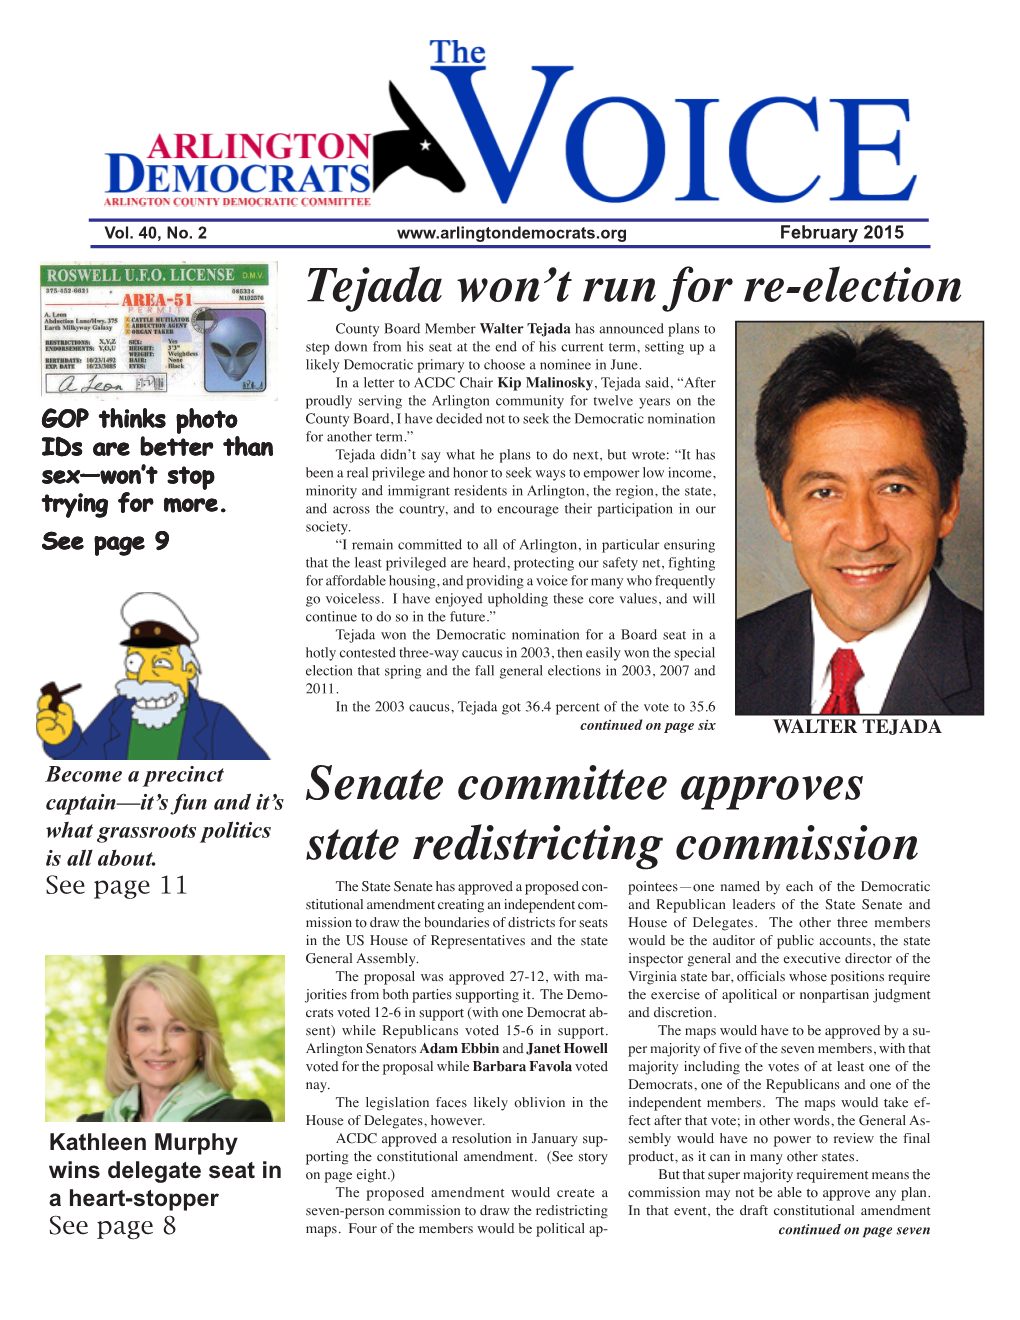 Tejada Won't Run for Re-Election Senate Committee Approves State